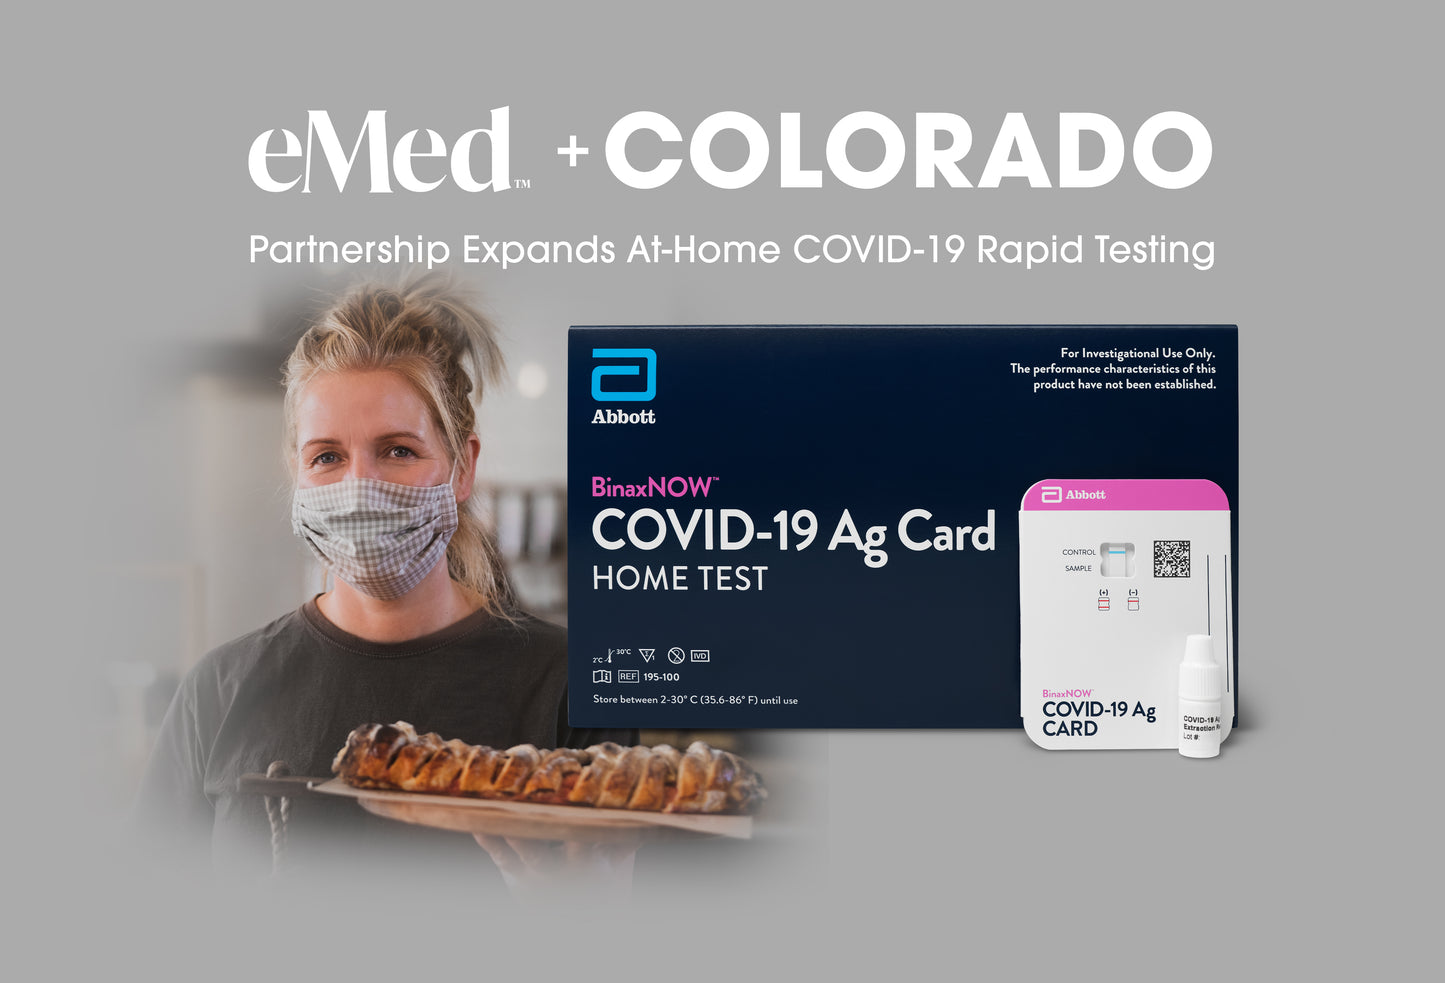 eMed and State of Colorado Partnership Expands Availability of Free At-Home COVID-19 Rapid Testing